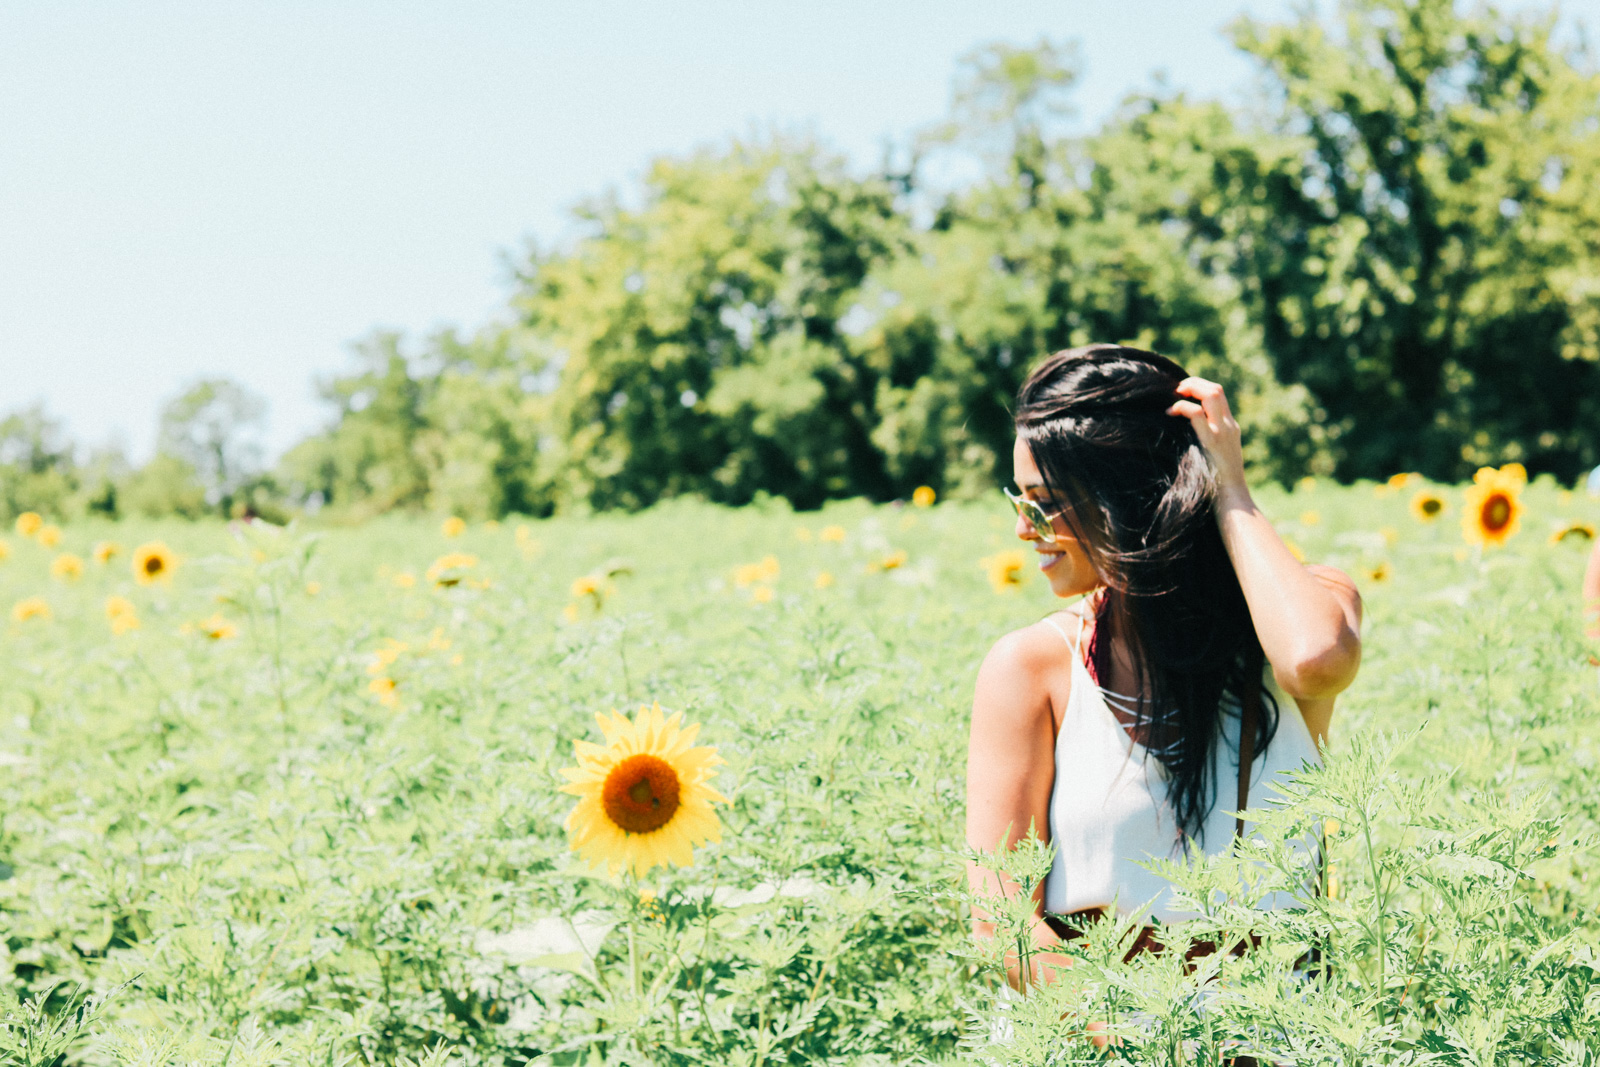 Vineyard and sunflower field exploring for the perfect girls day out and brunch alternative